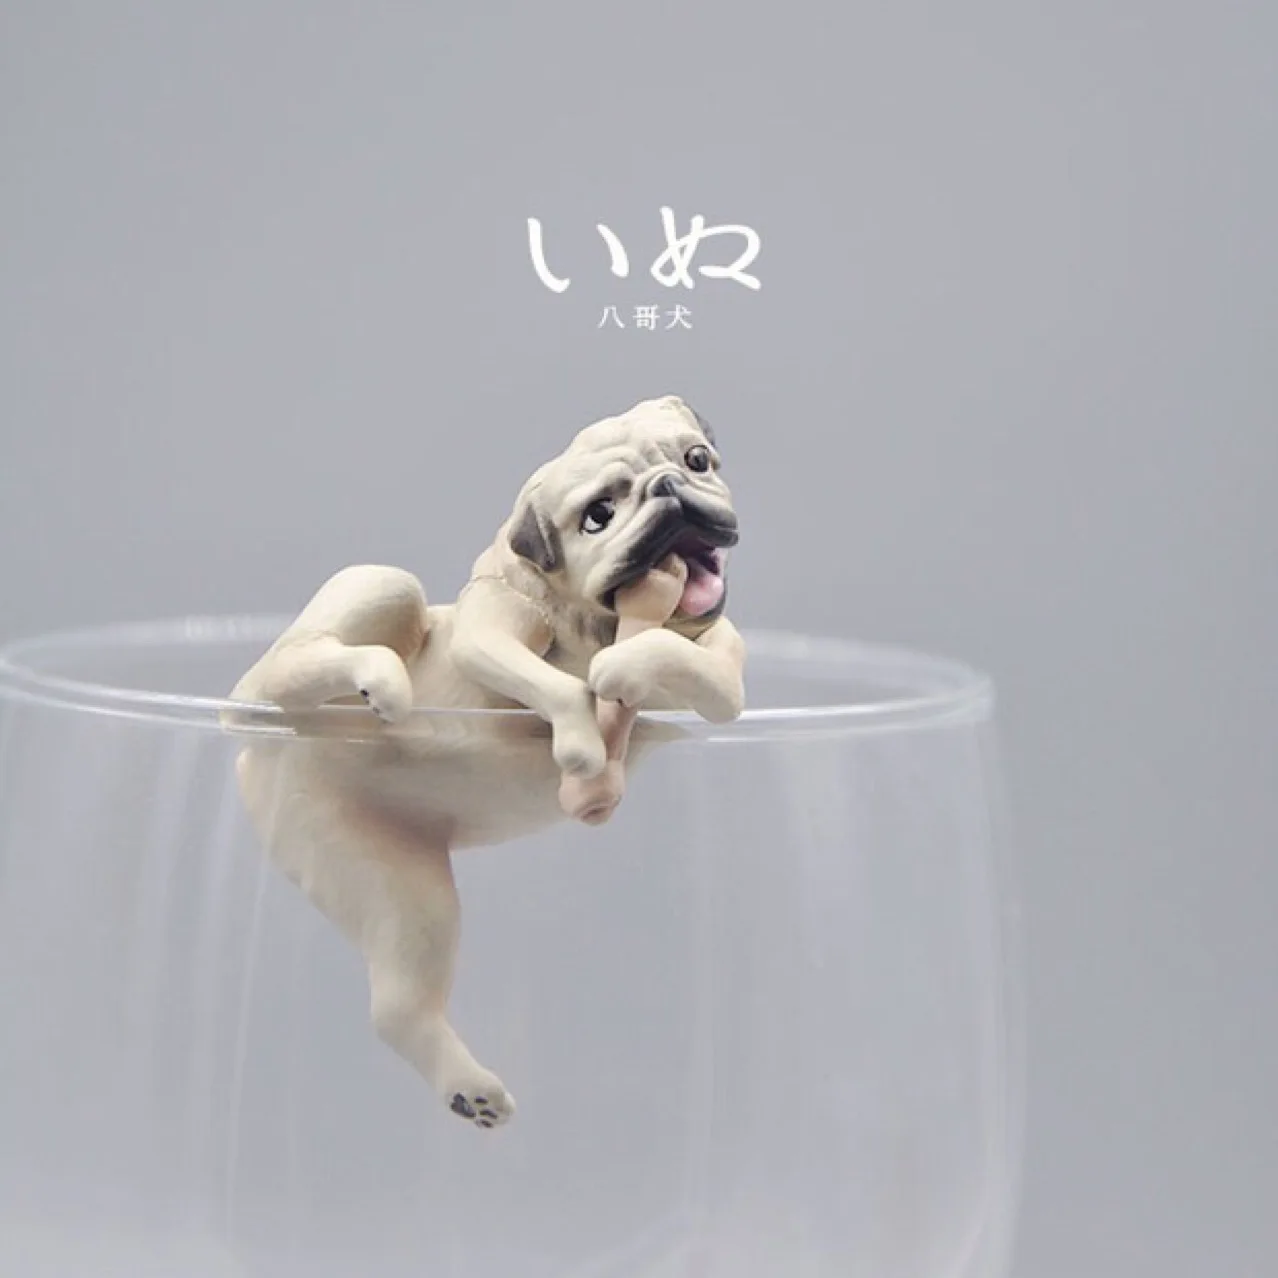 

1 PC Mini Dog Cup Edge Decoration Cute Spoof Puppy Pug Funny Animal Model Toys Gifts for Kids Adults